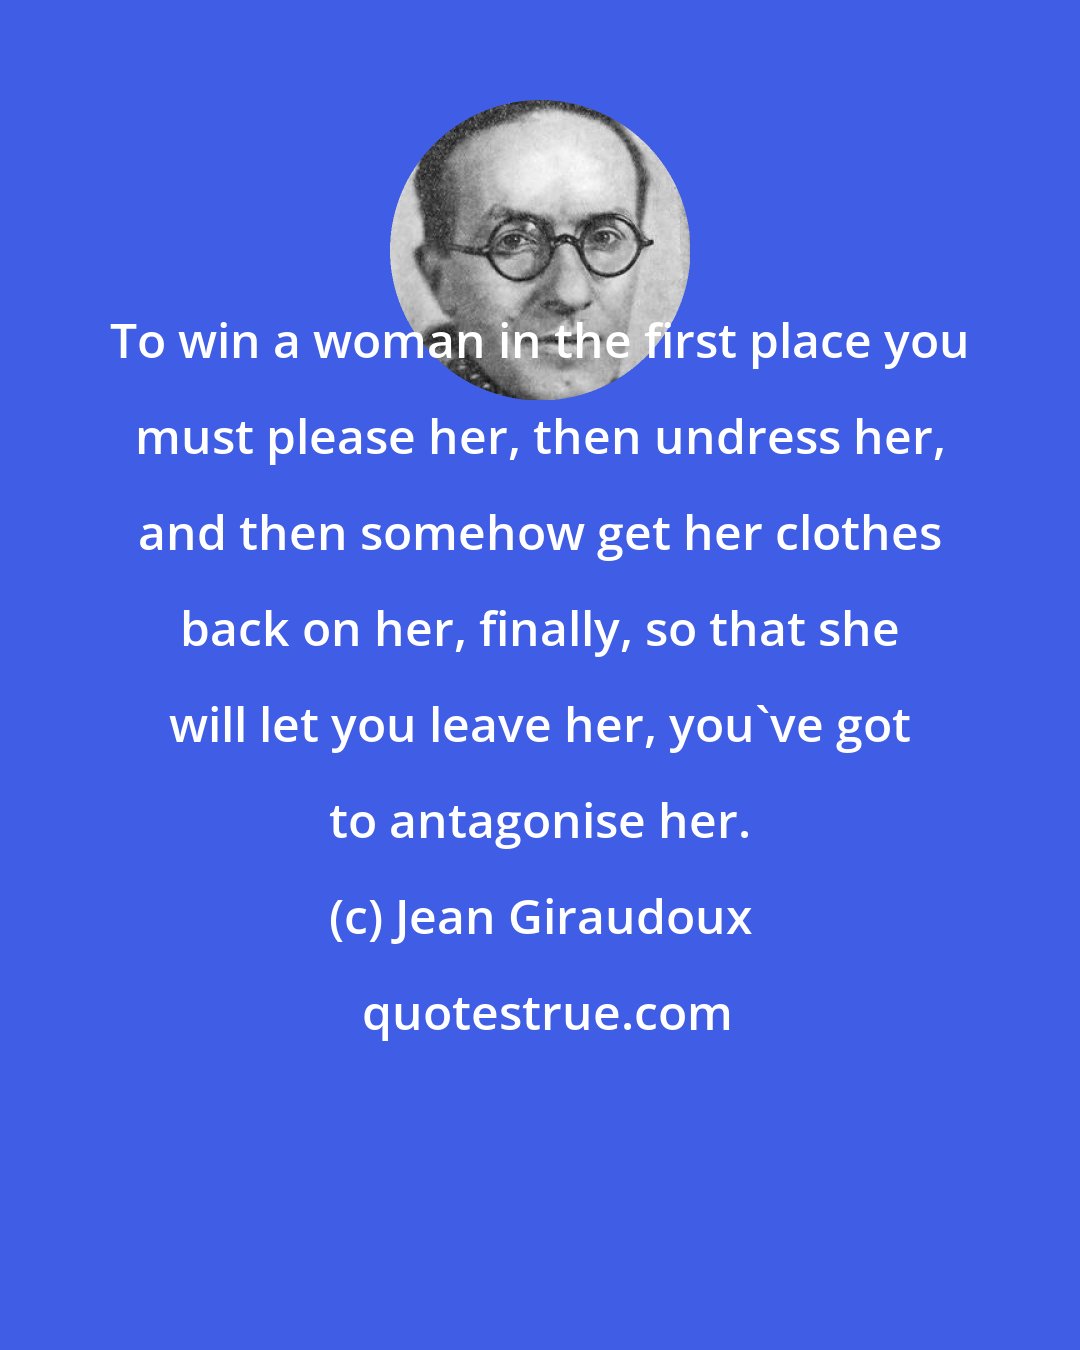 Jean Giraudoux: To win a woman in the first place you must please her, then undress her, and then somehow get her clothes back on her, finally, so that she will let you leave her, you've got to antagonise her.